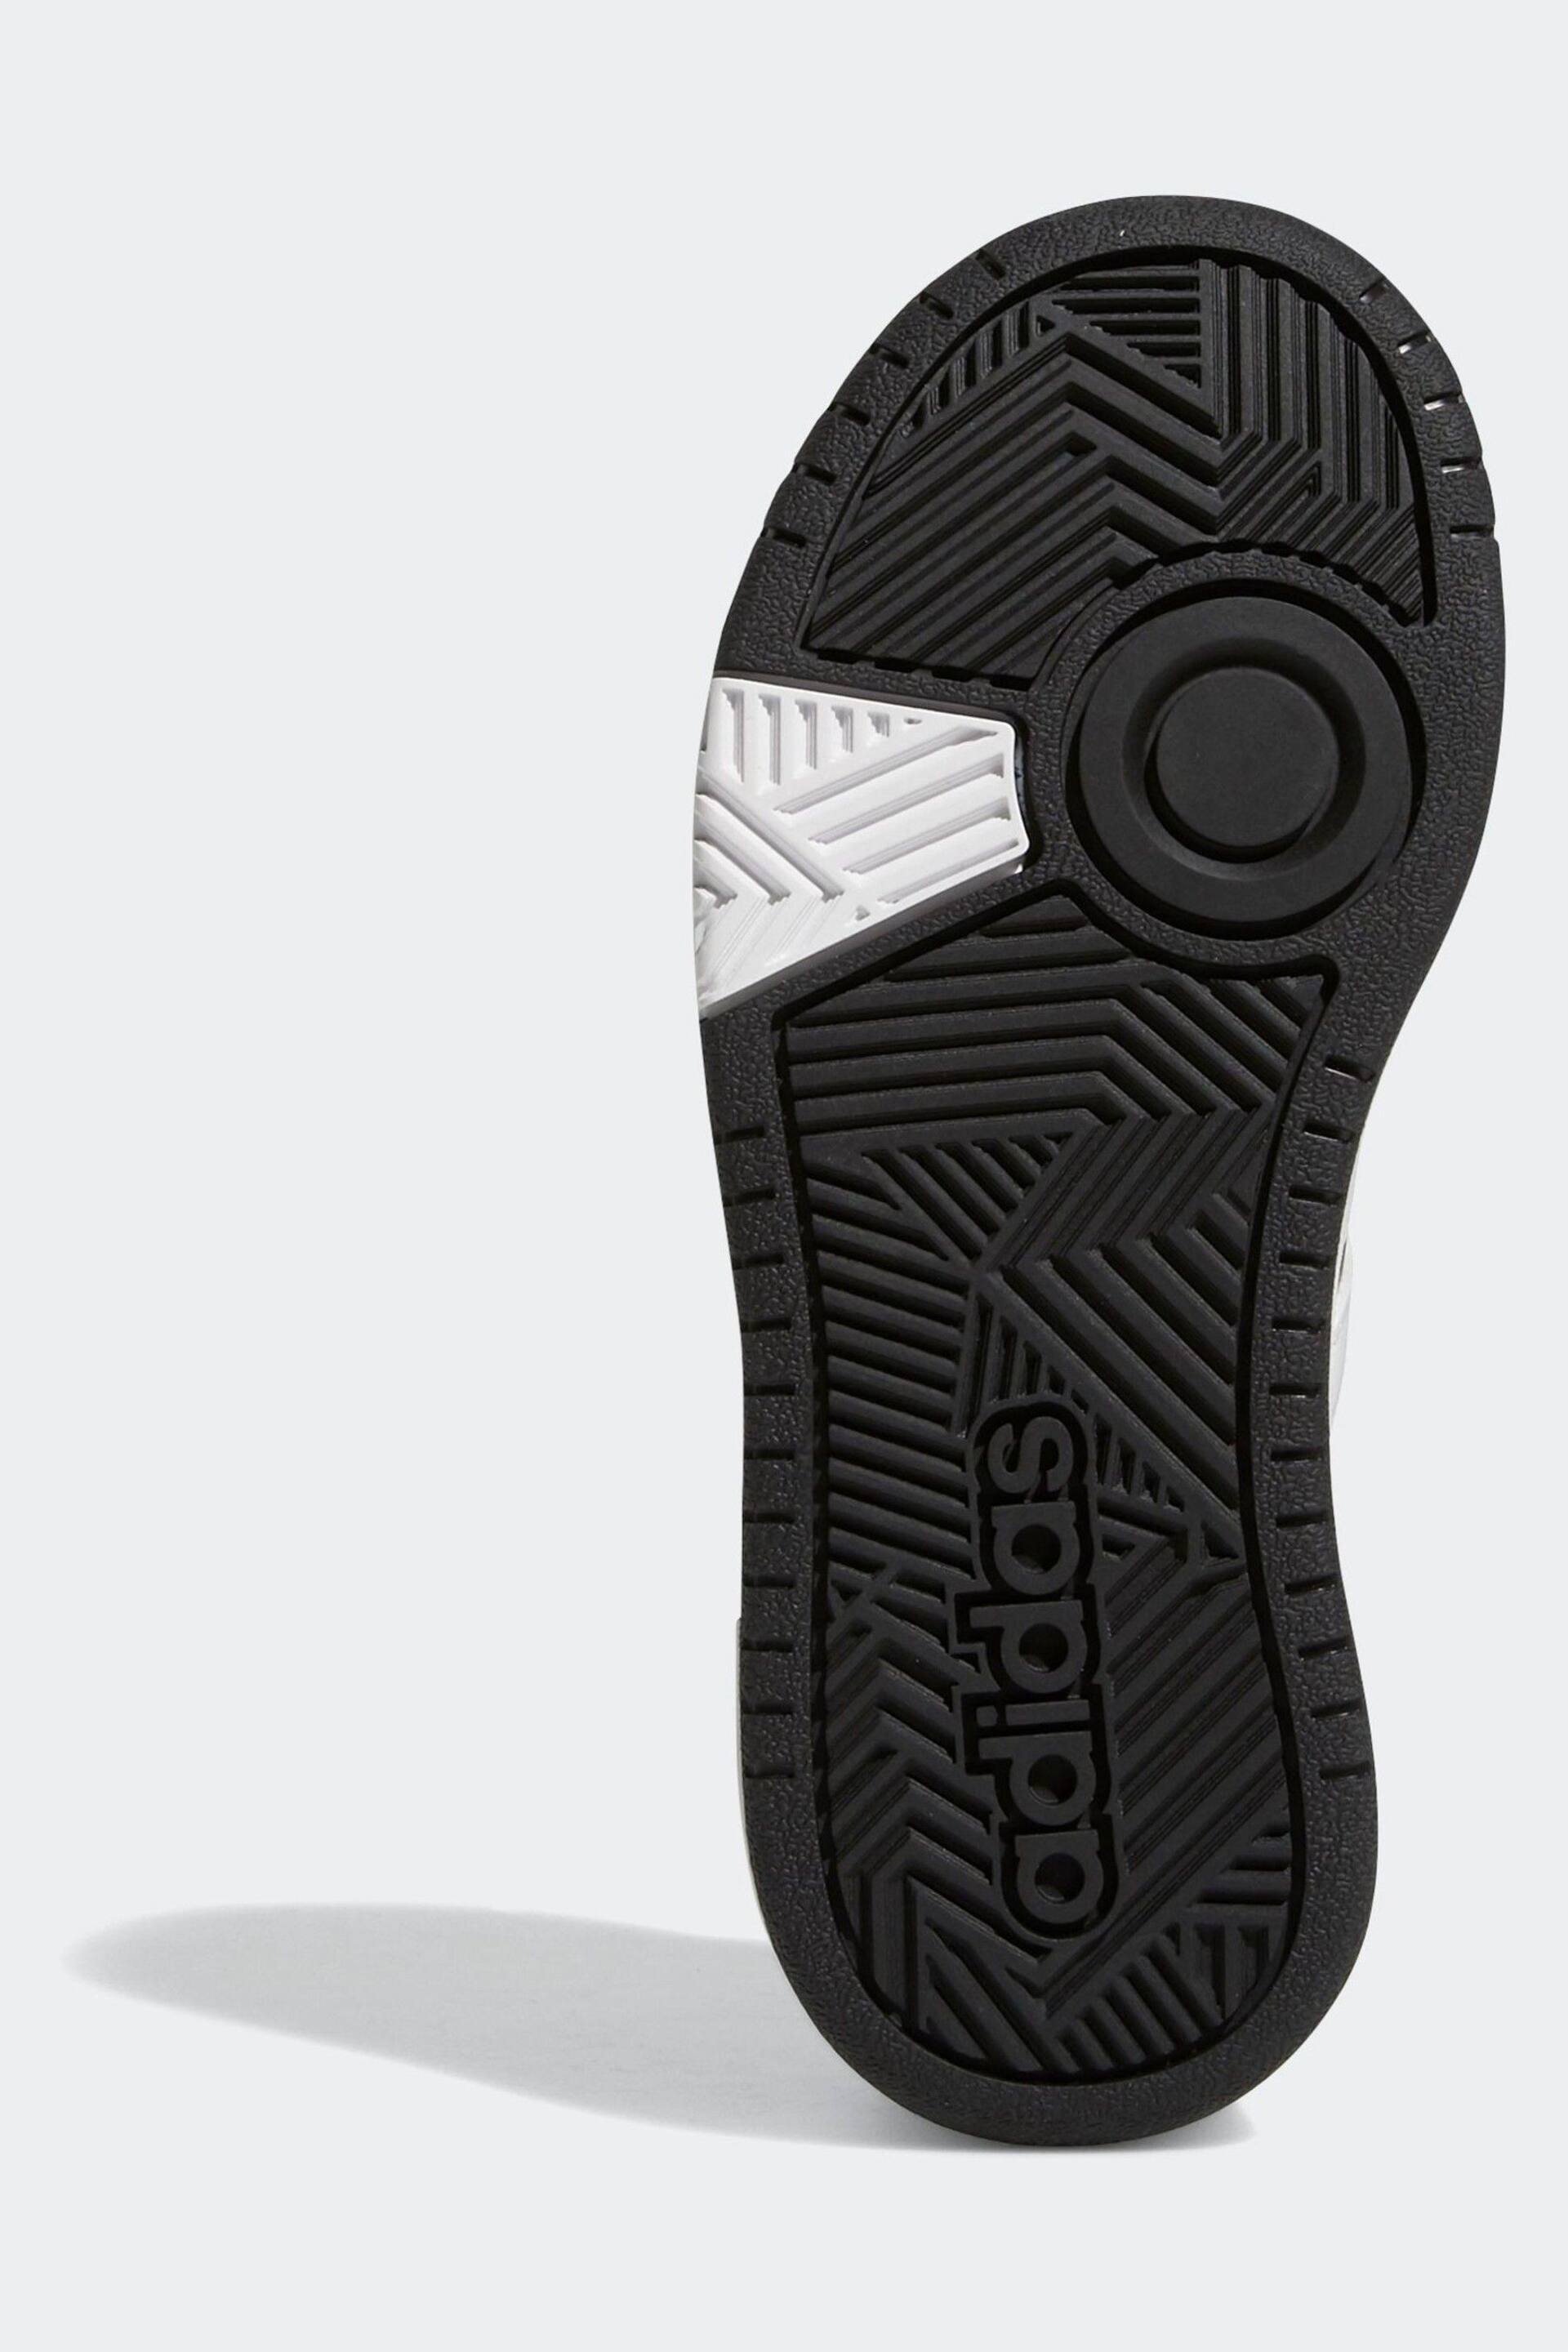 adidas Black/white Hoops Mid Shoes - Image 7 of 9